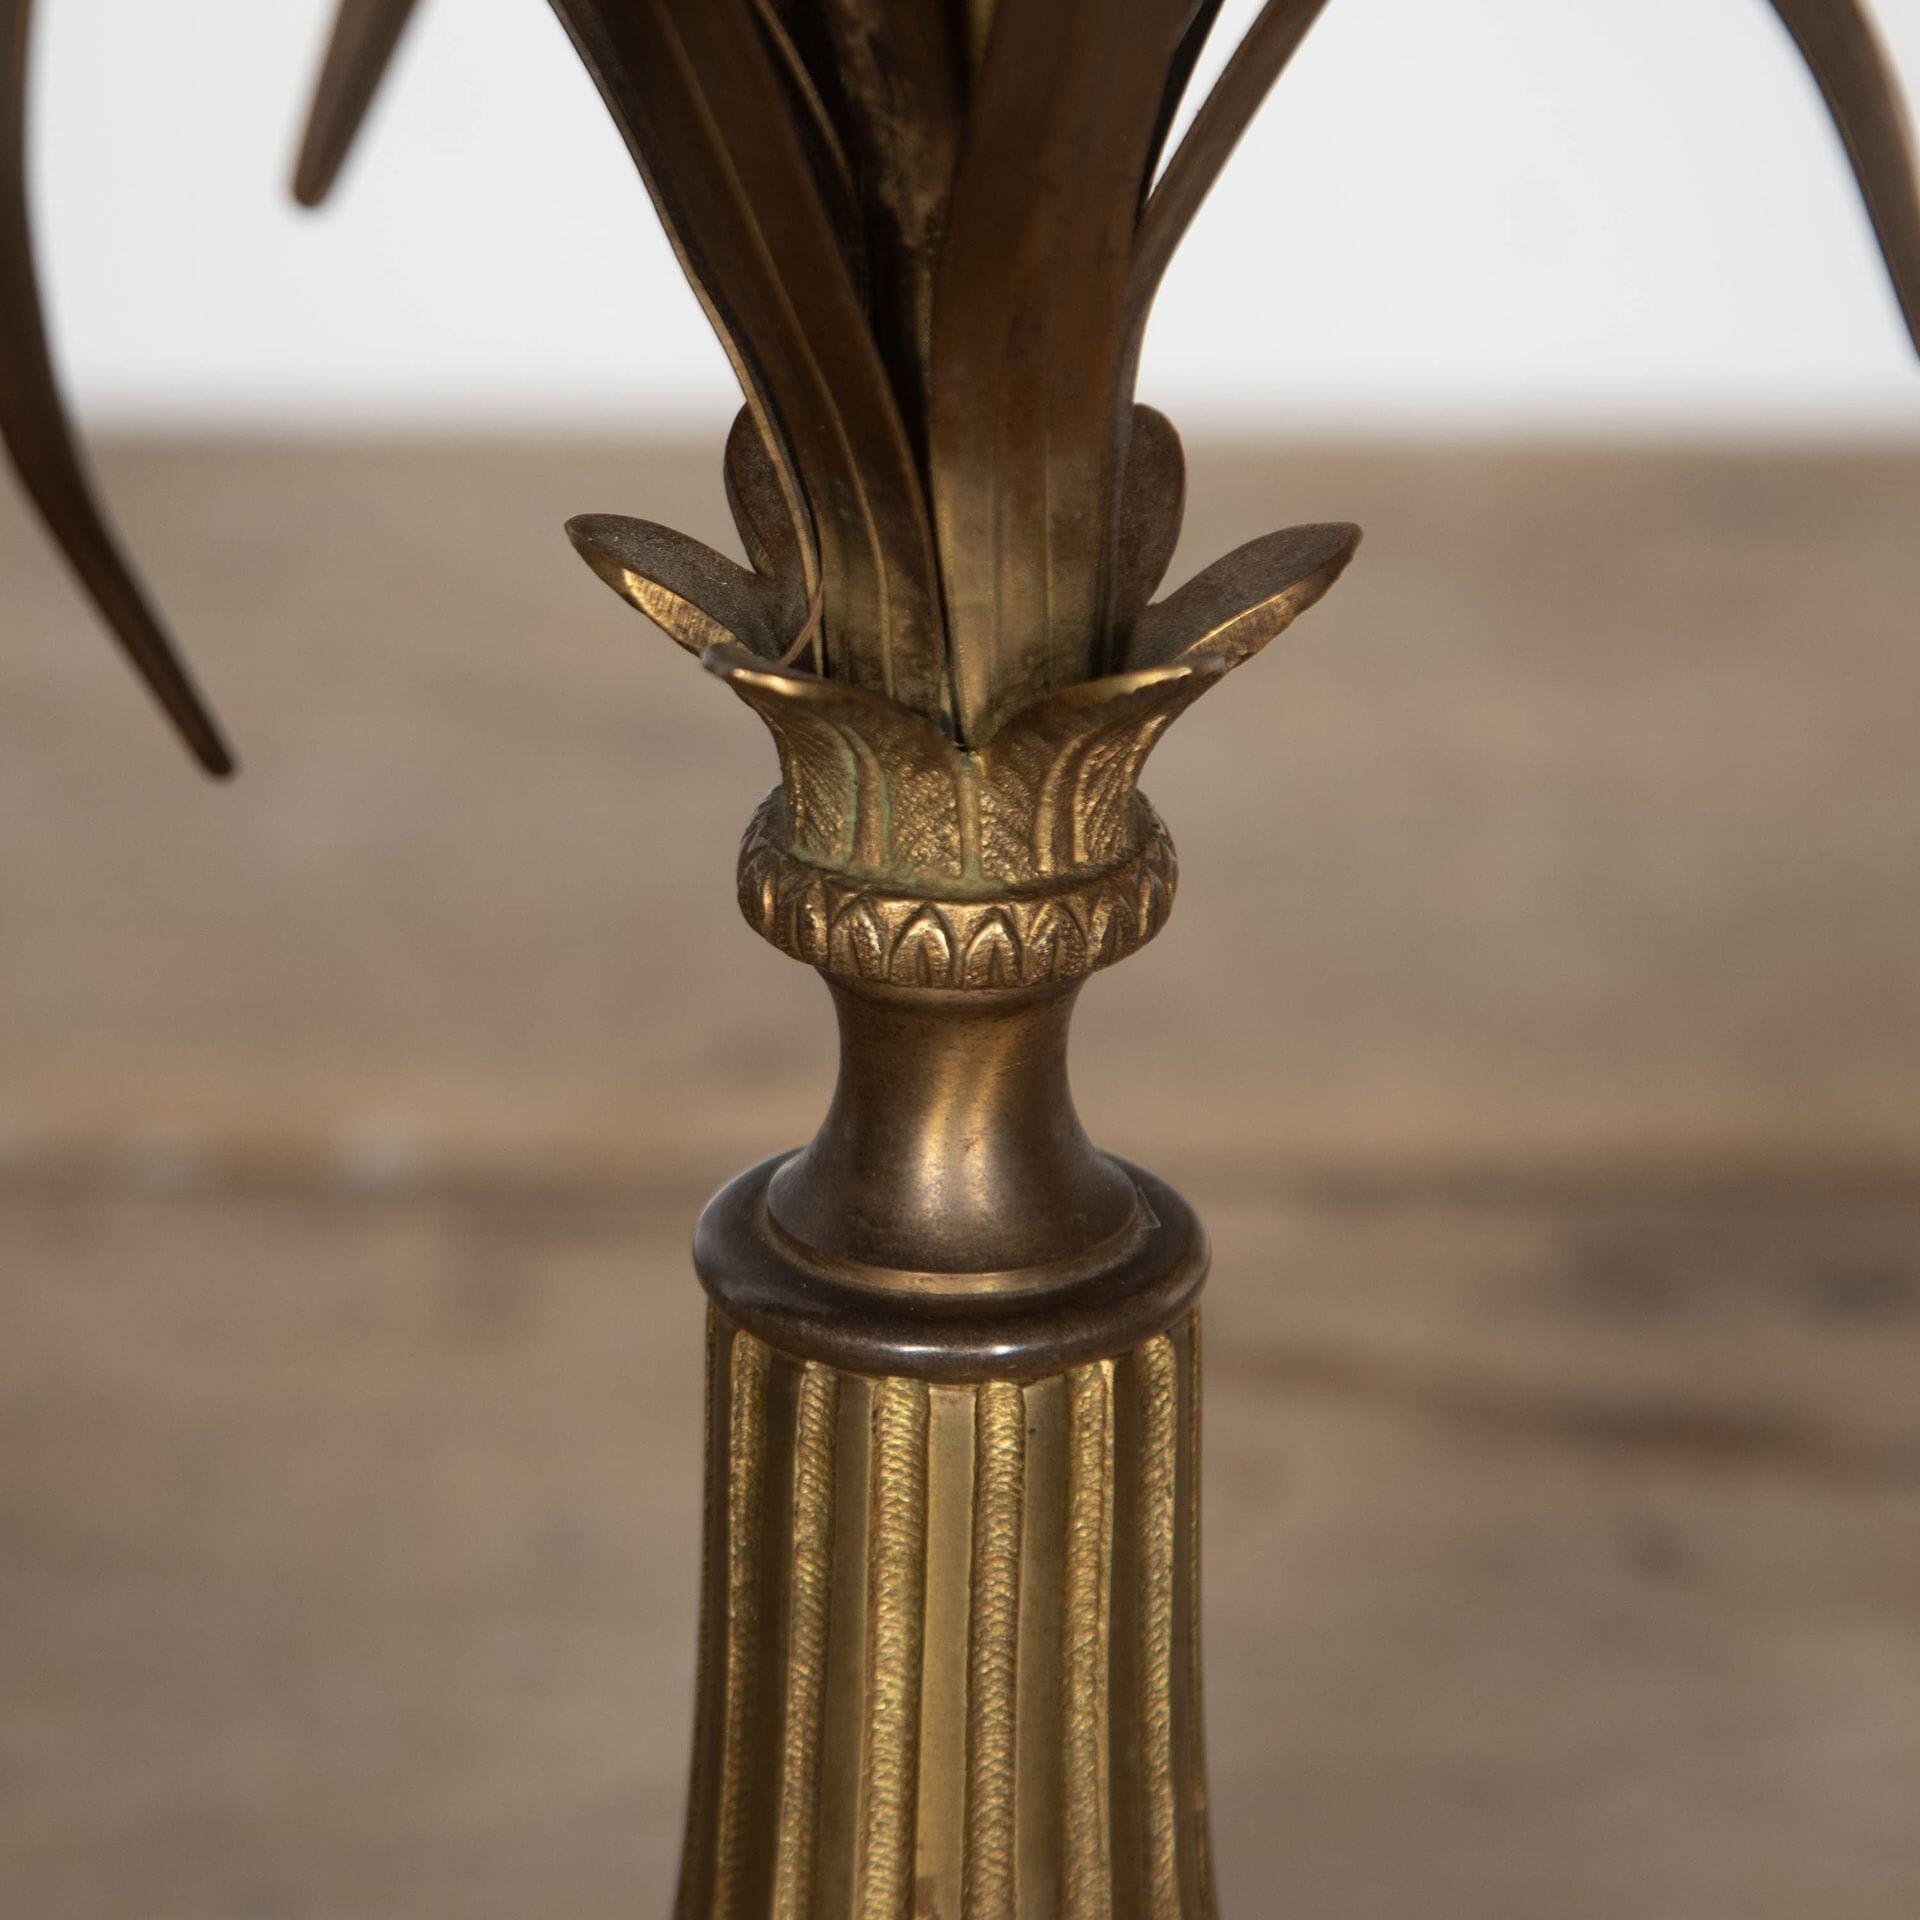 20th century extremely rare bronze Maison Charles, (the most famous lighting and bronze foundry in France) to include the original bronze shade. Stamped Maison Charles to the base.This item has passed PAT testing according to UK standards.